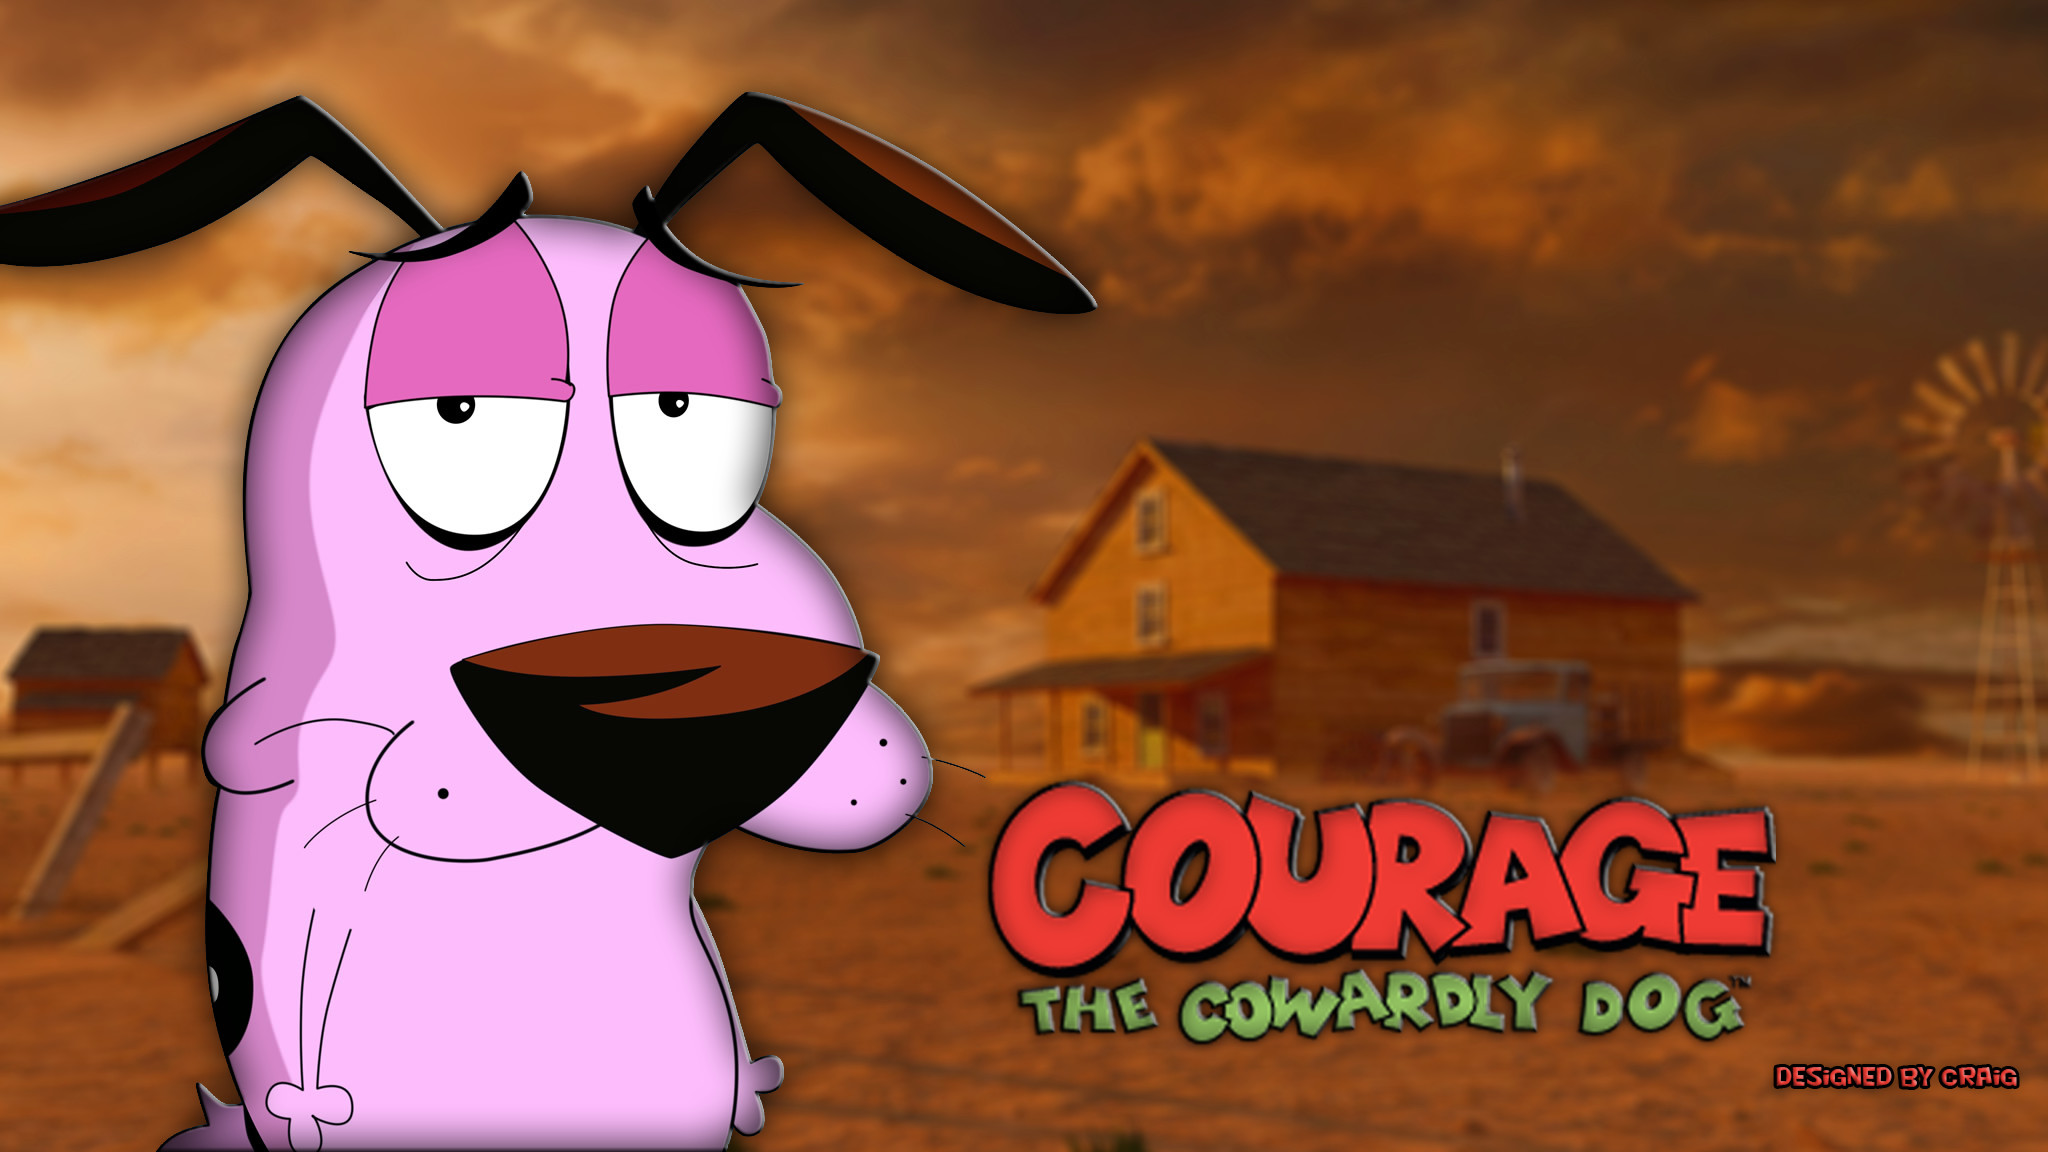 File Courage The Cowardly Dog Wallpapers HD Quality Shizuko Bertsch